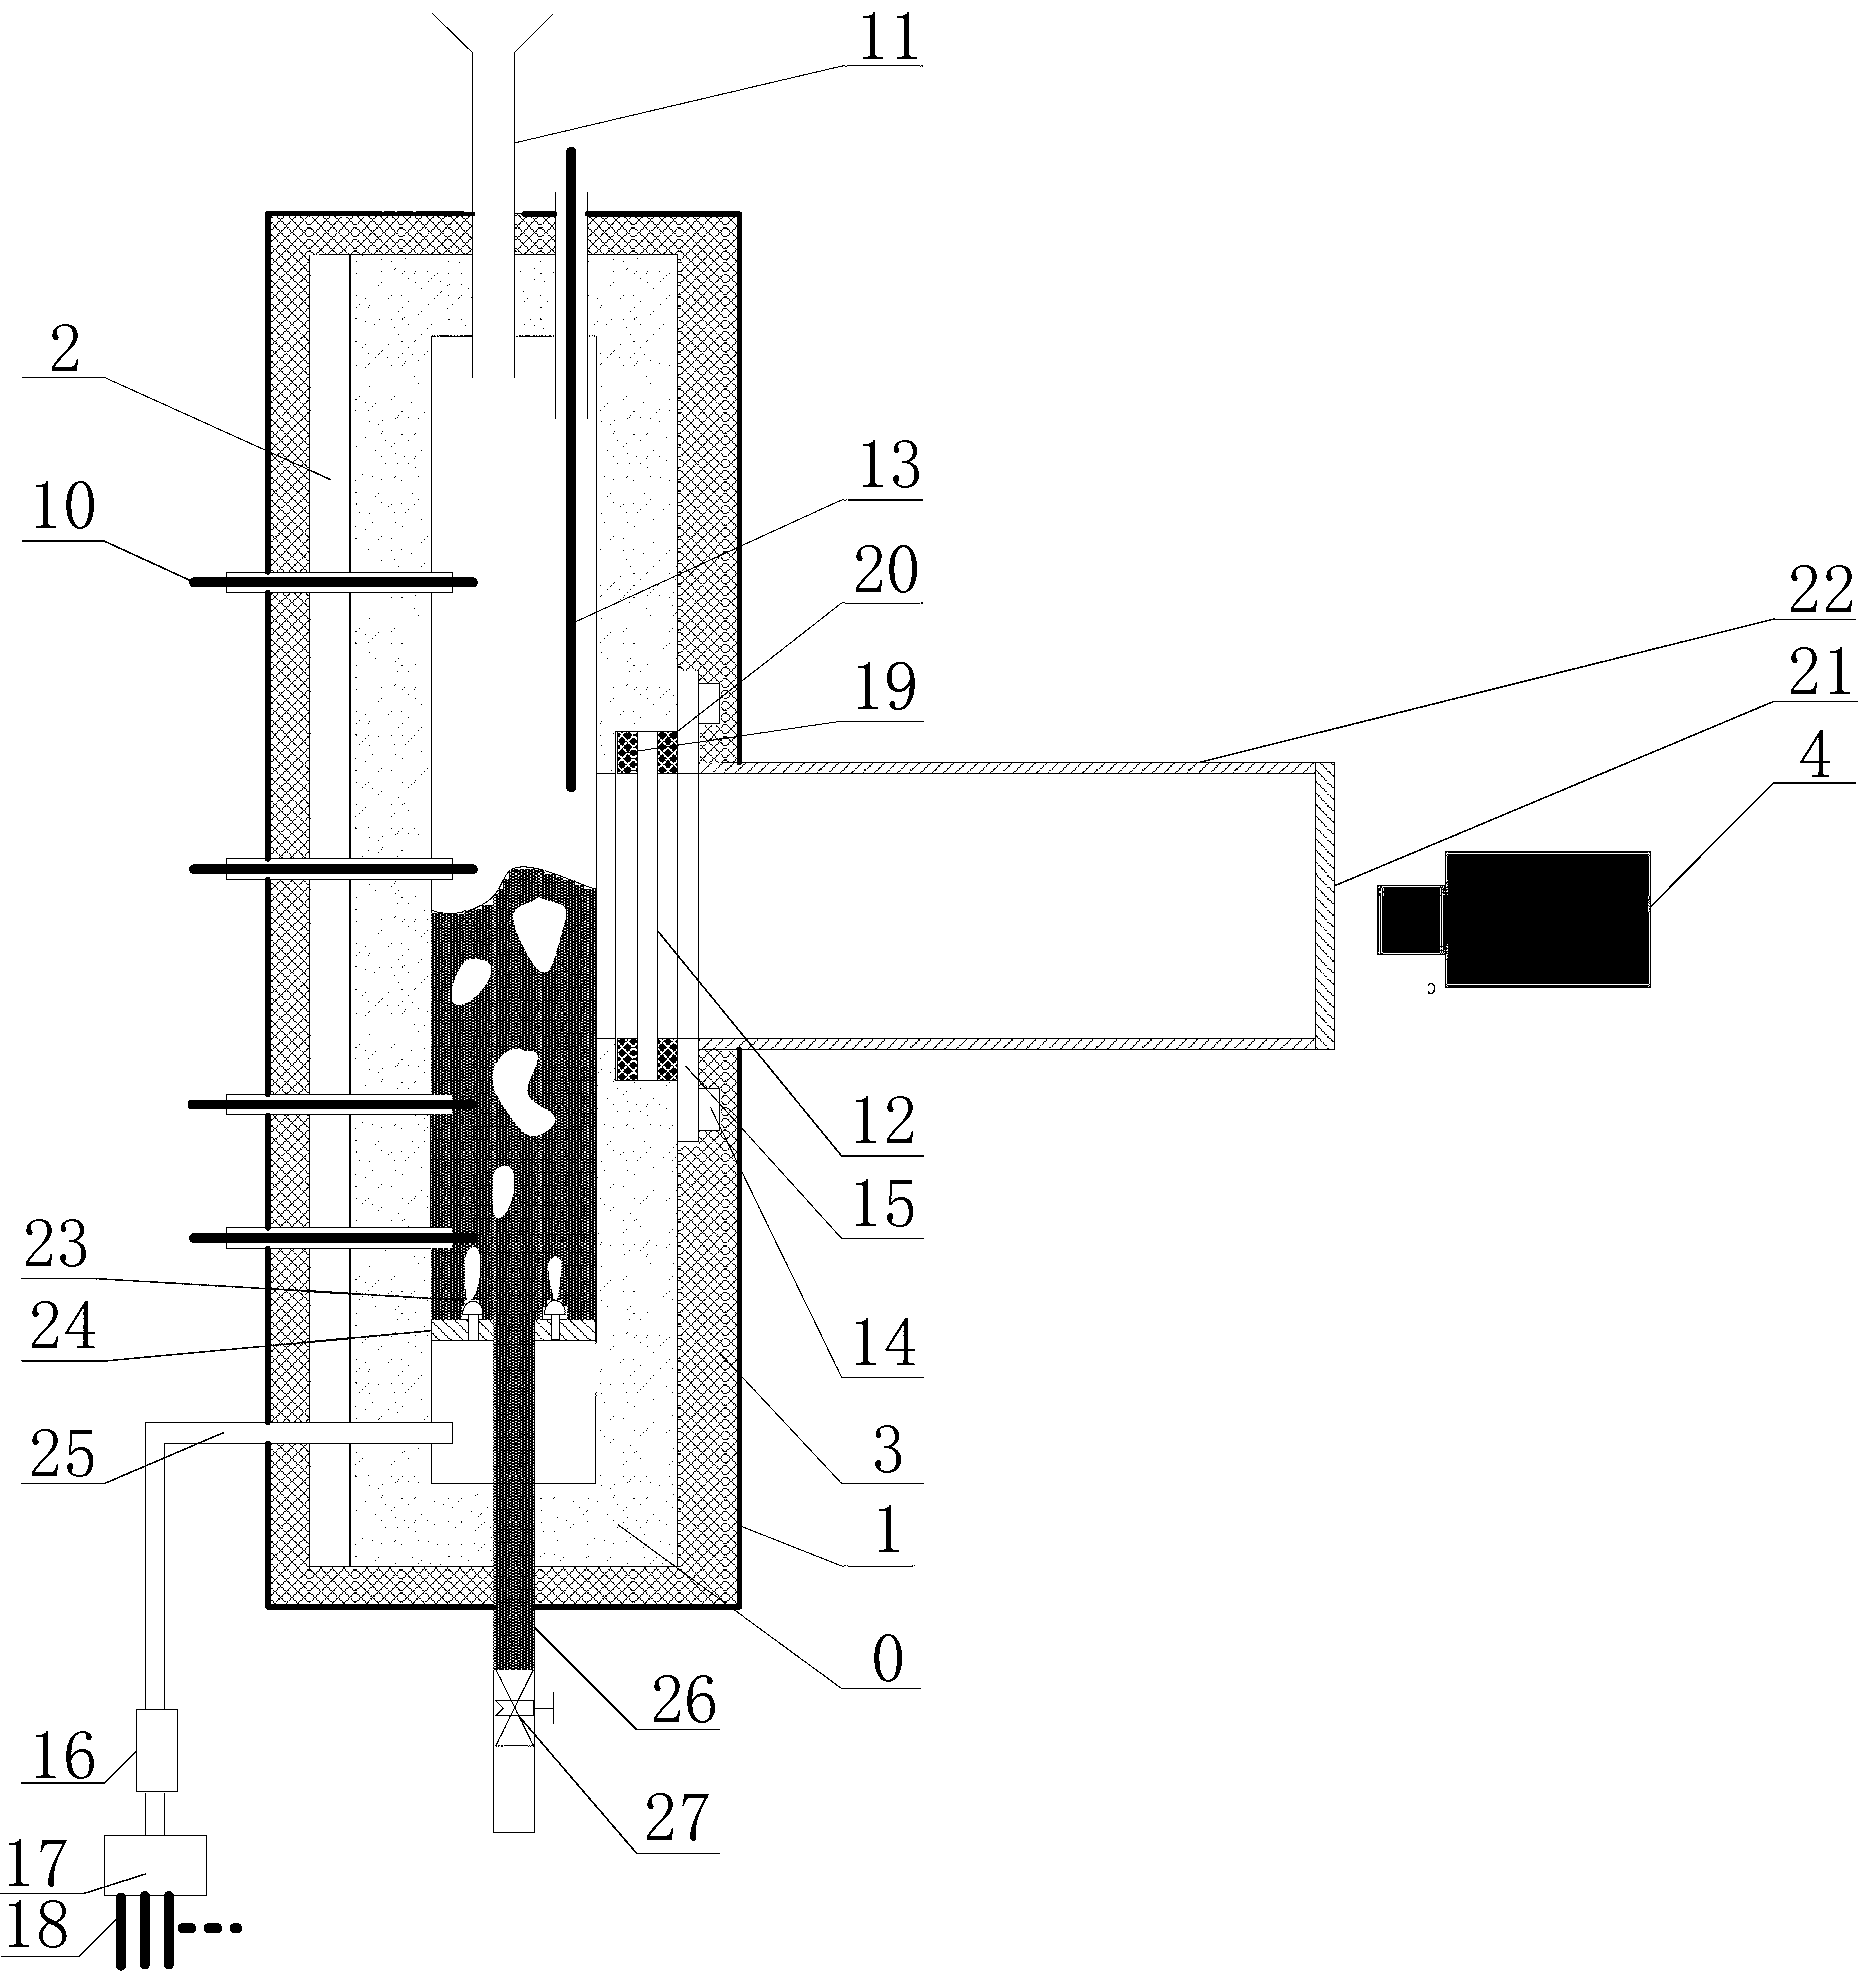 Visual high-temperature fluidized bed